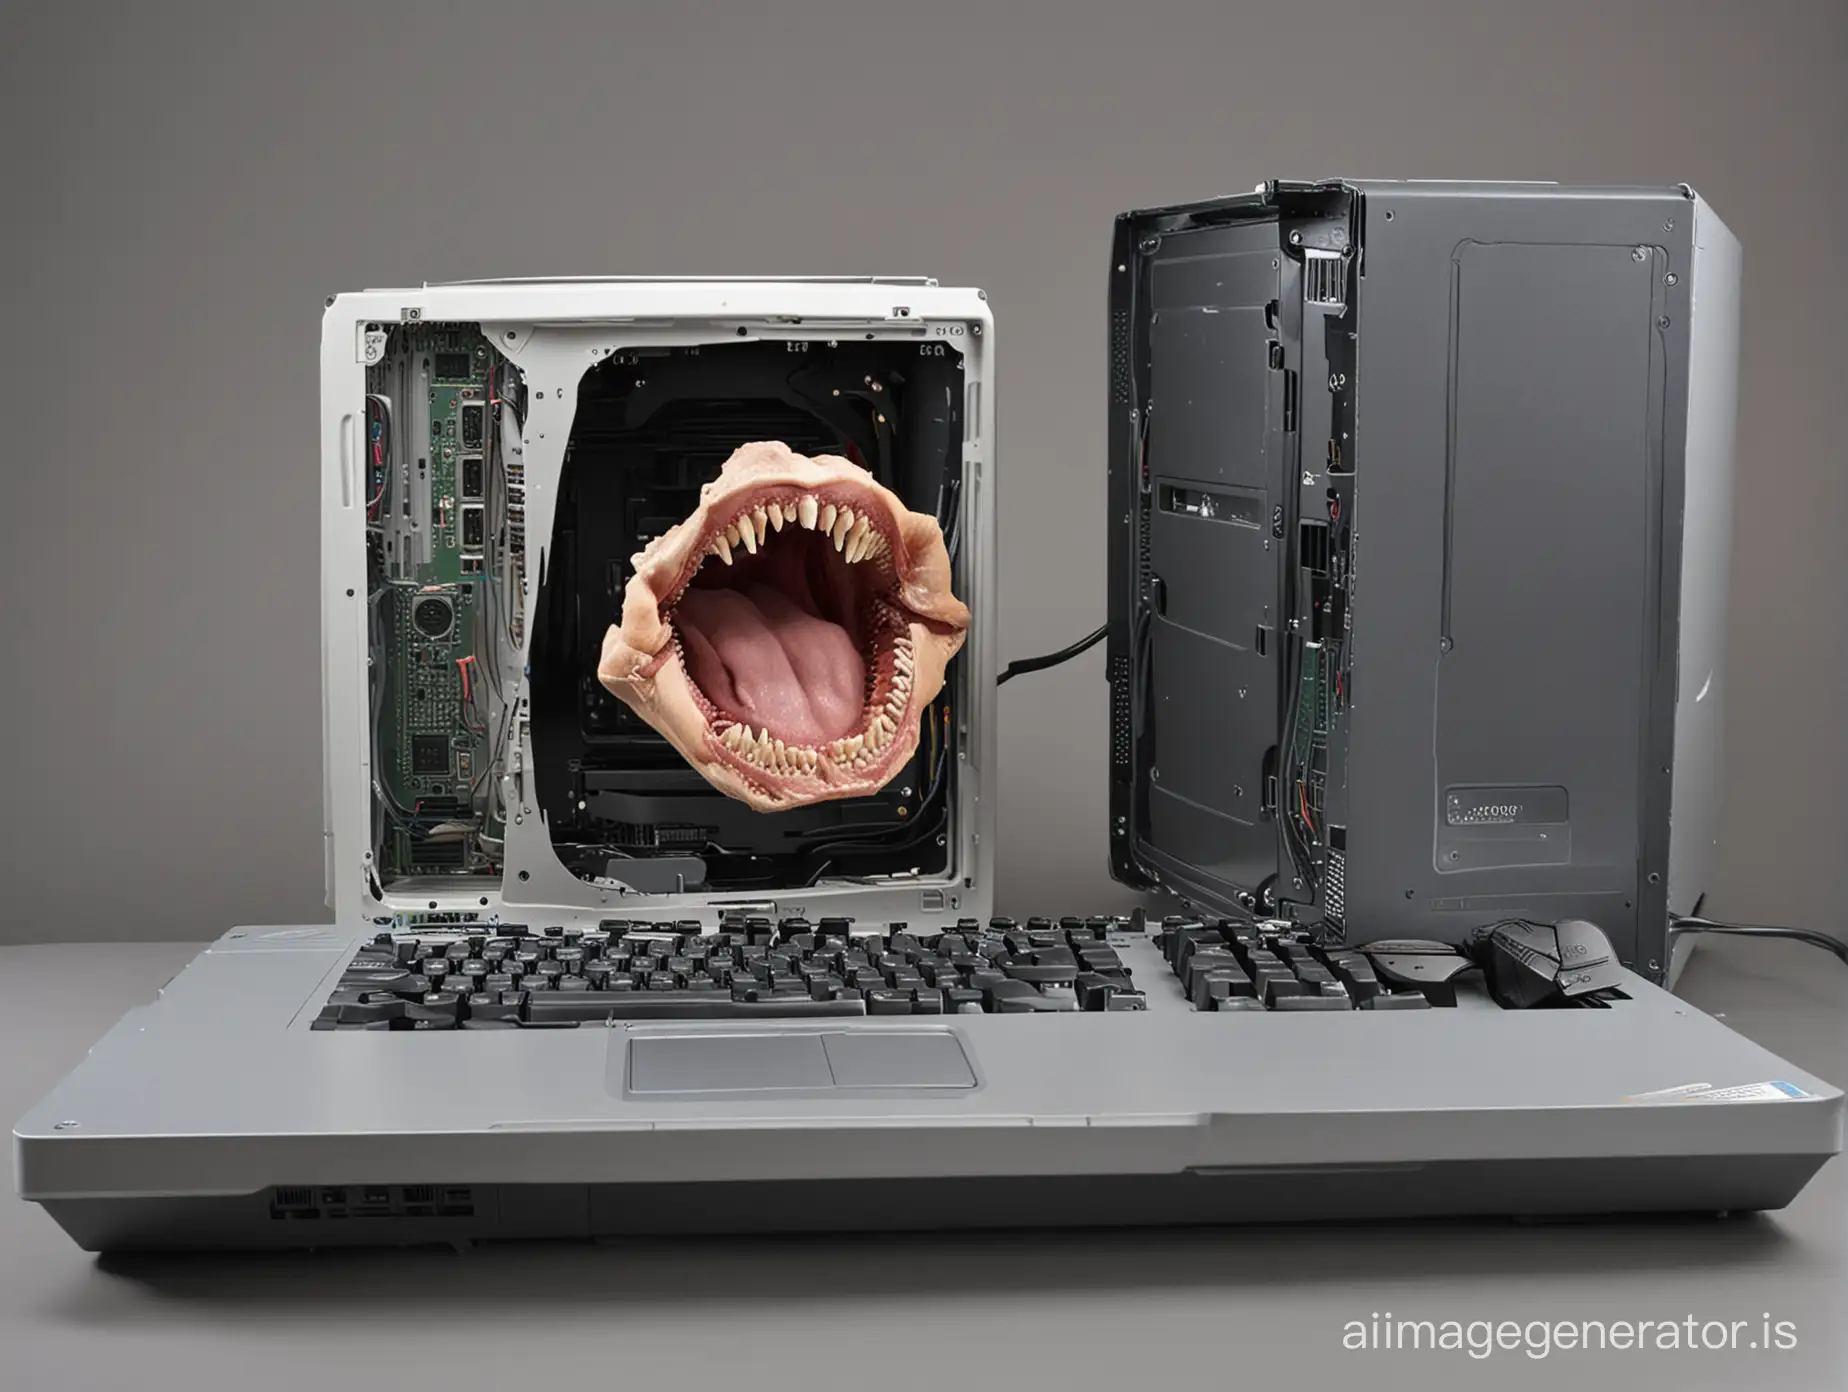 A computer taking a bite out of another computer